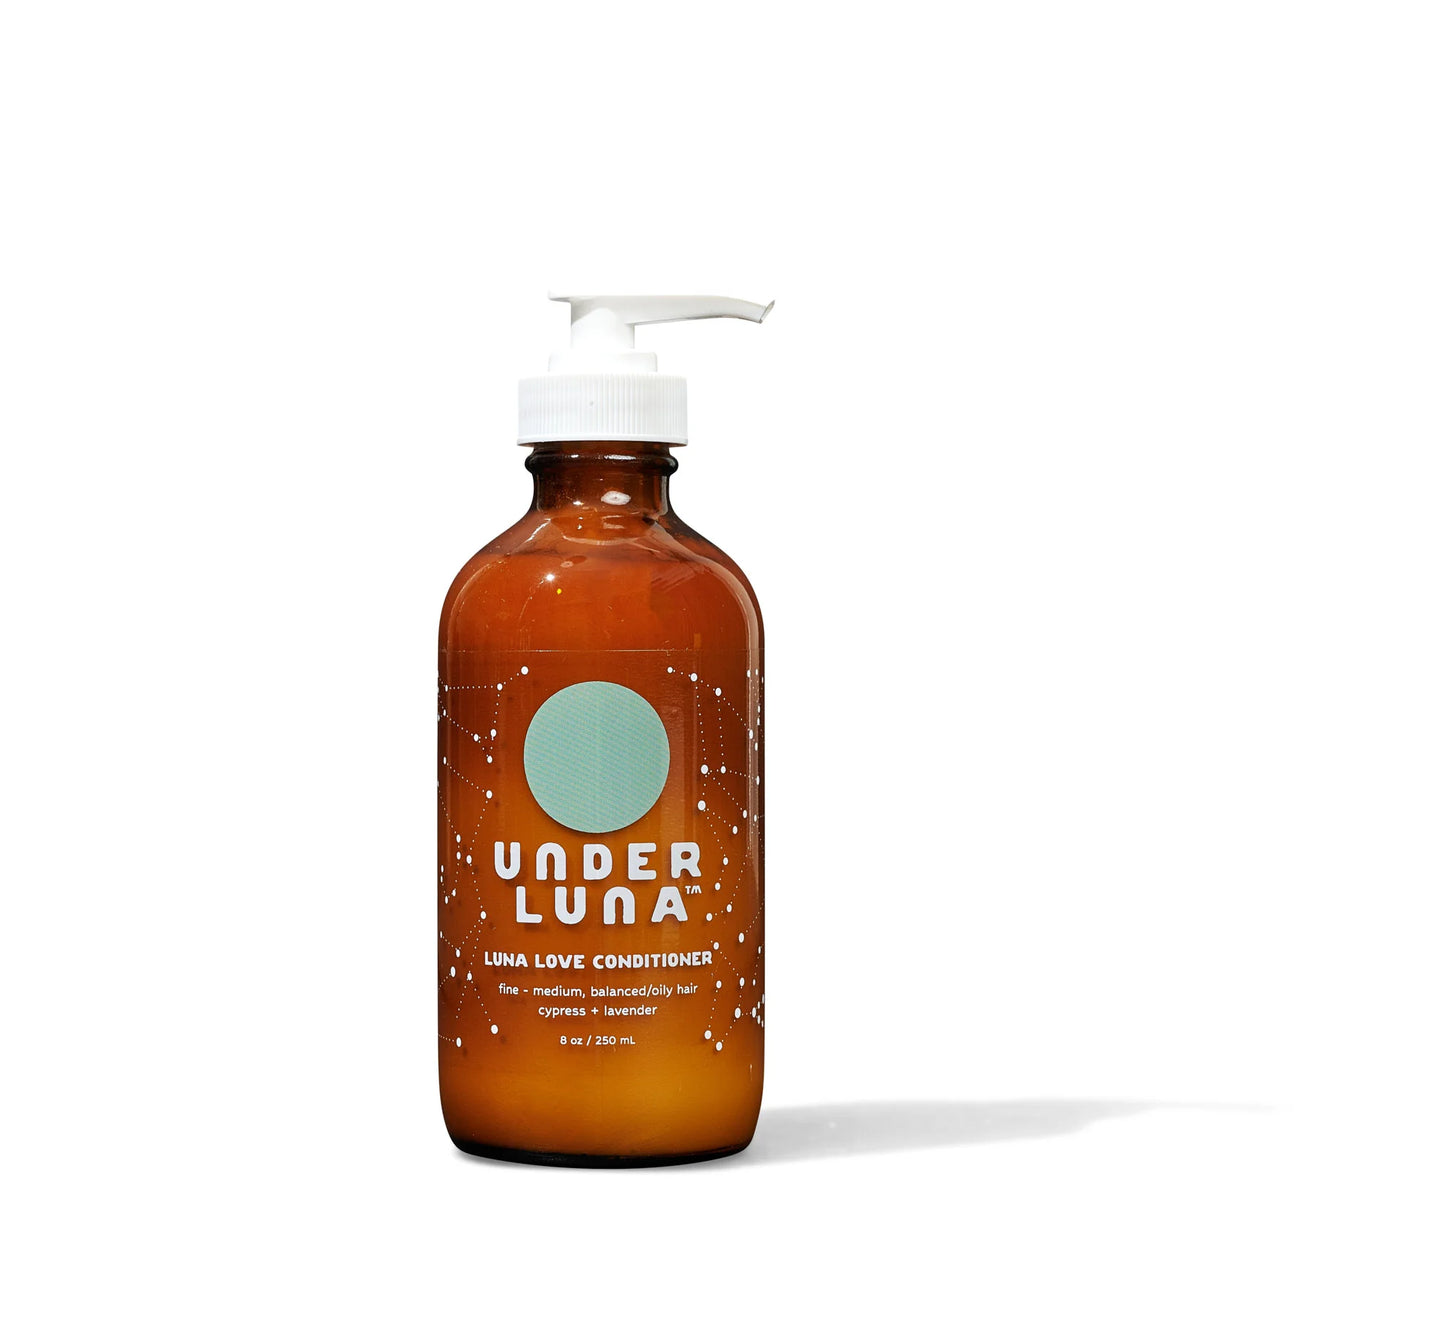 Herbal Conditioner - Luna Love for fine to medium hair / balanced to oily hair - Travel & Full Size